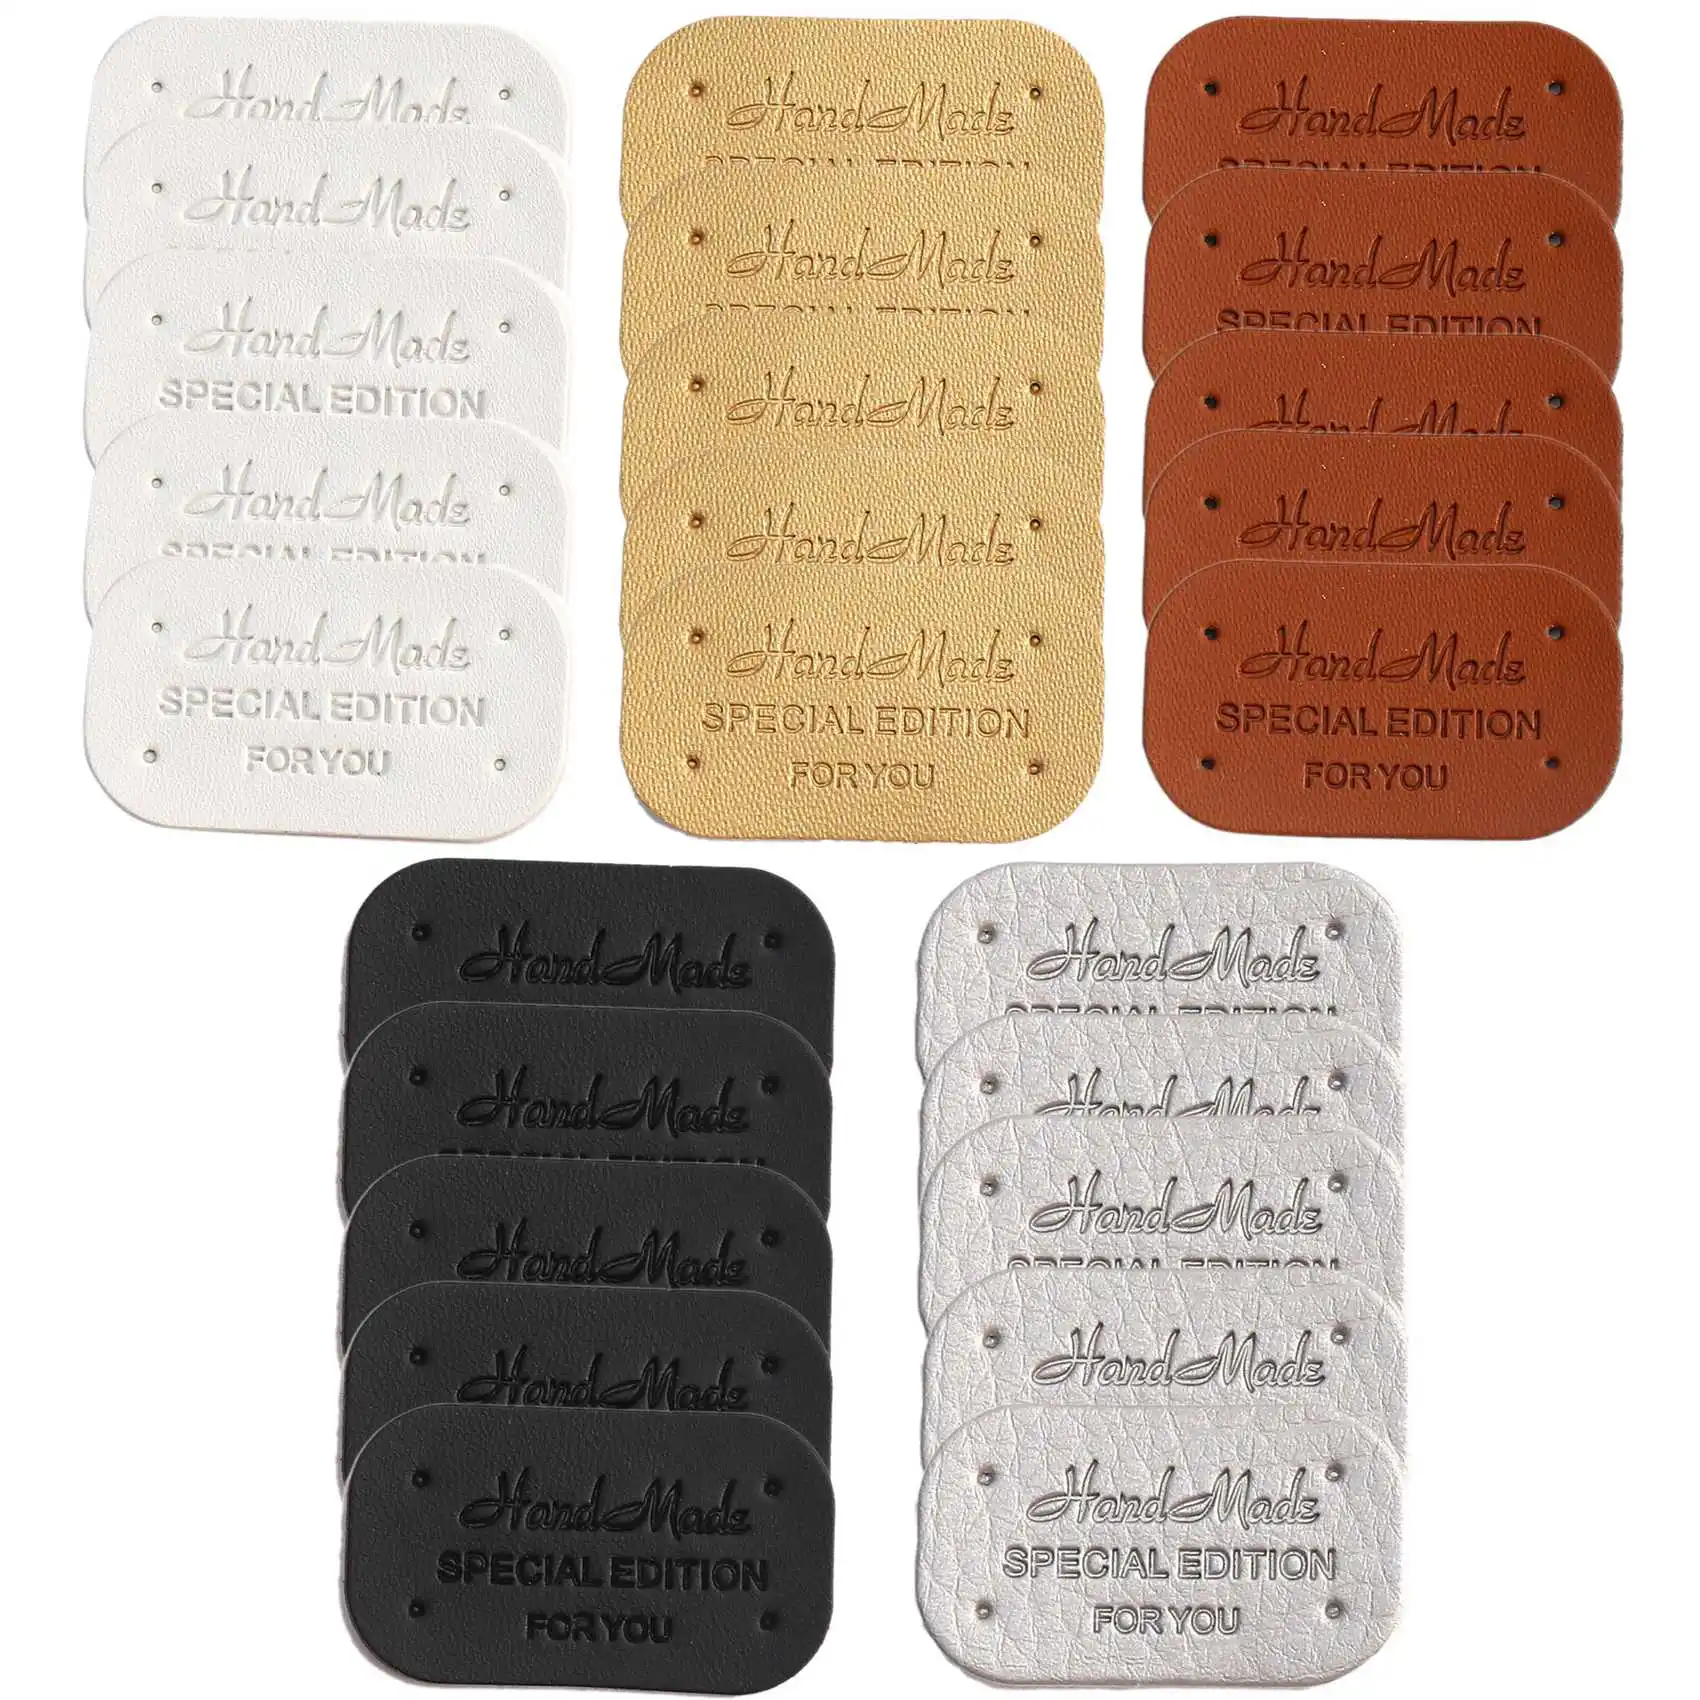 

100Pcs Faux Leather Tags for Clothes Handmade Gift Handcraft Faux Leather Labels DIY Sewing Tags Garment Accessories